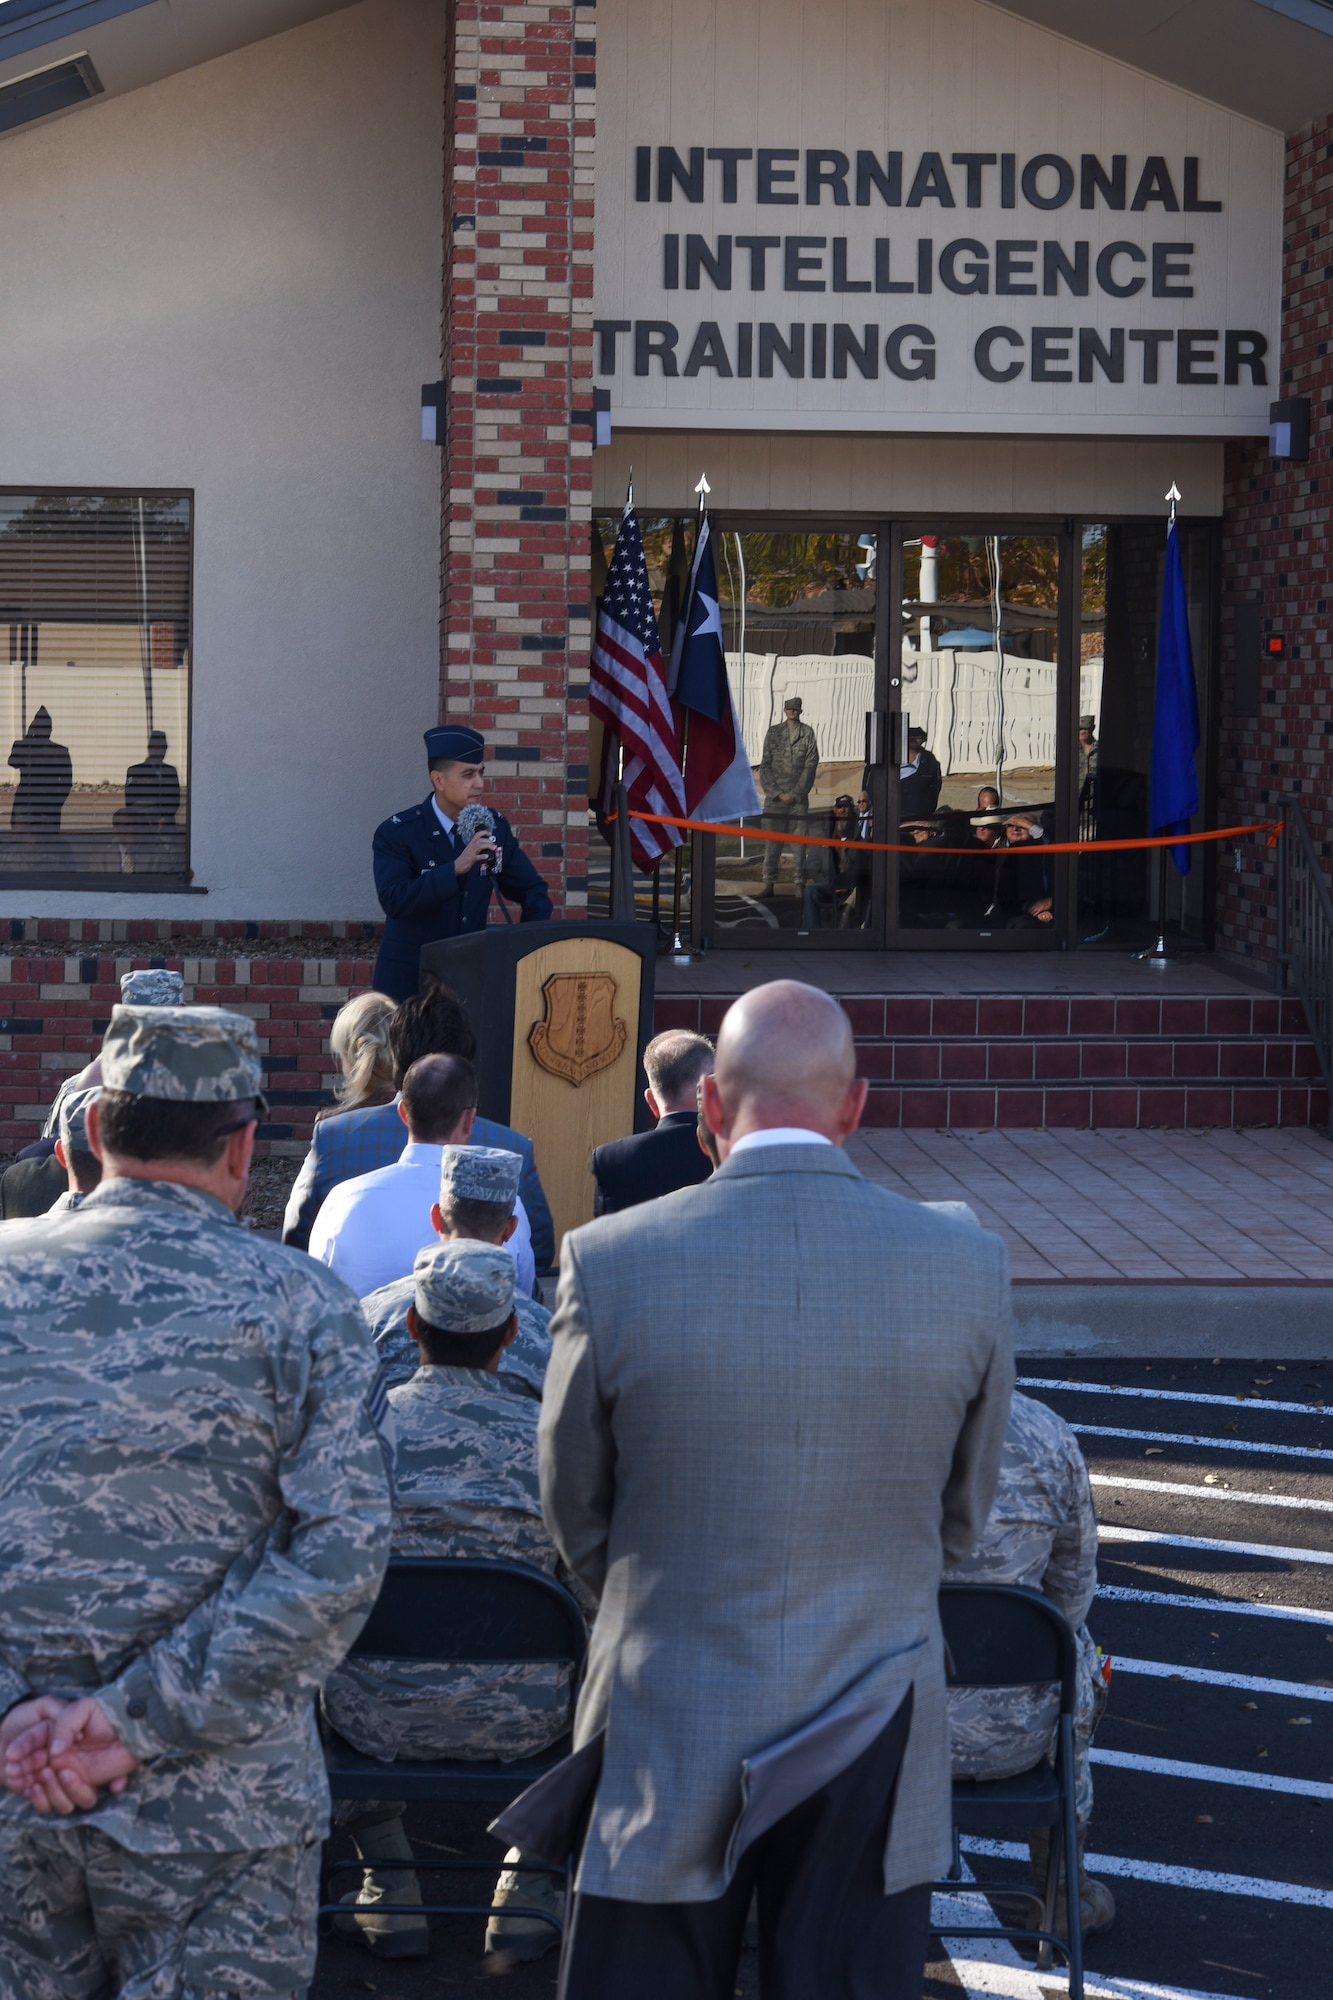 U.S. Air Force Col. Ricky Mills, 17th Training Wing commander, shares a few words before the ribbon cutting for the International Intelligence Training Center on Goodfellow Air Force Base, Texas, Nov. 21, 2017. Mills spoke on the importance of international partnerships for Goodfellow and the United States. (U.S. Air Force photo by Airman 1st Class Zachary Chapman/Released)